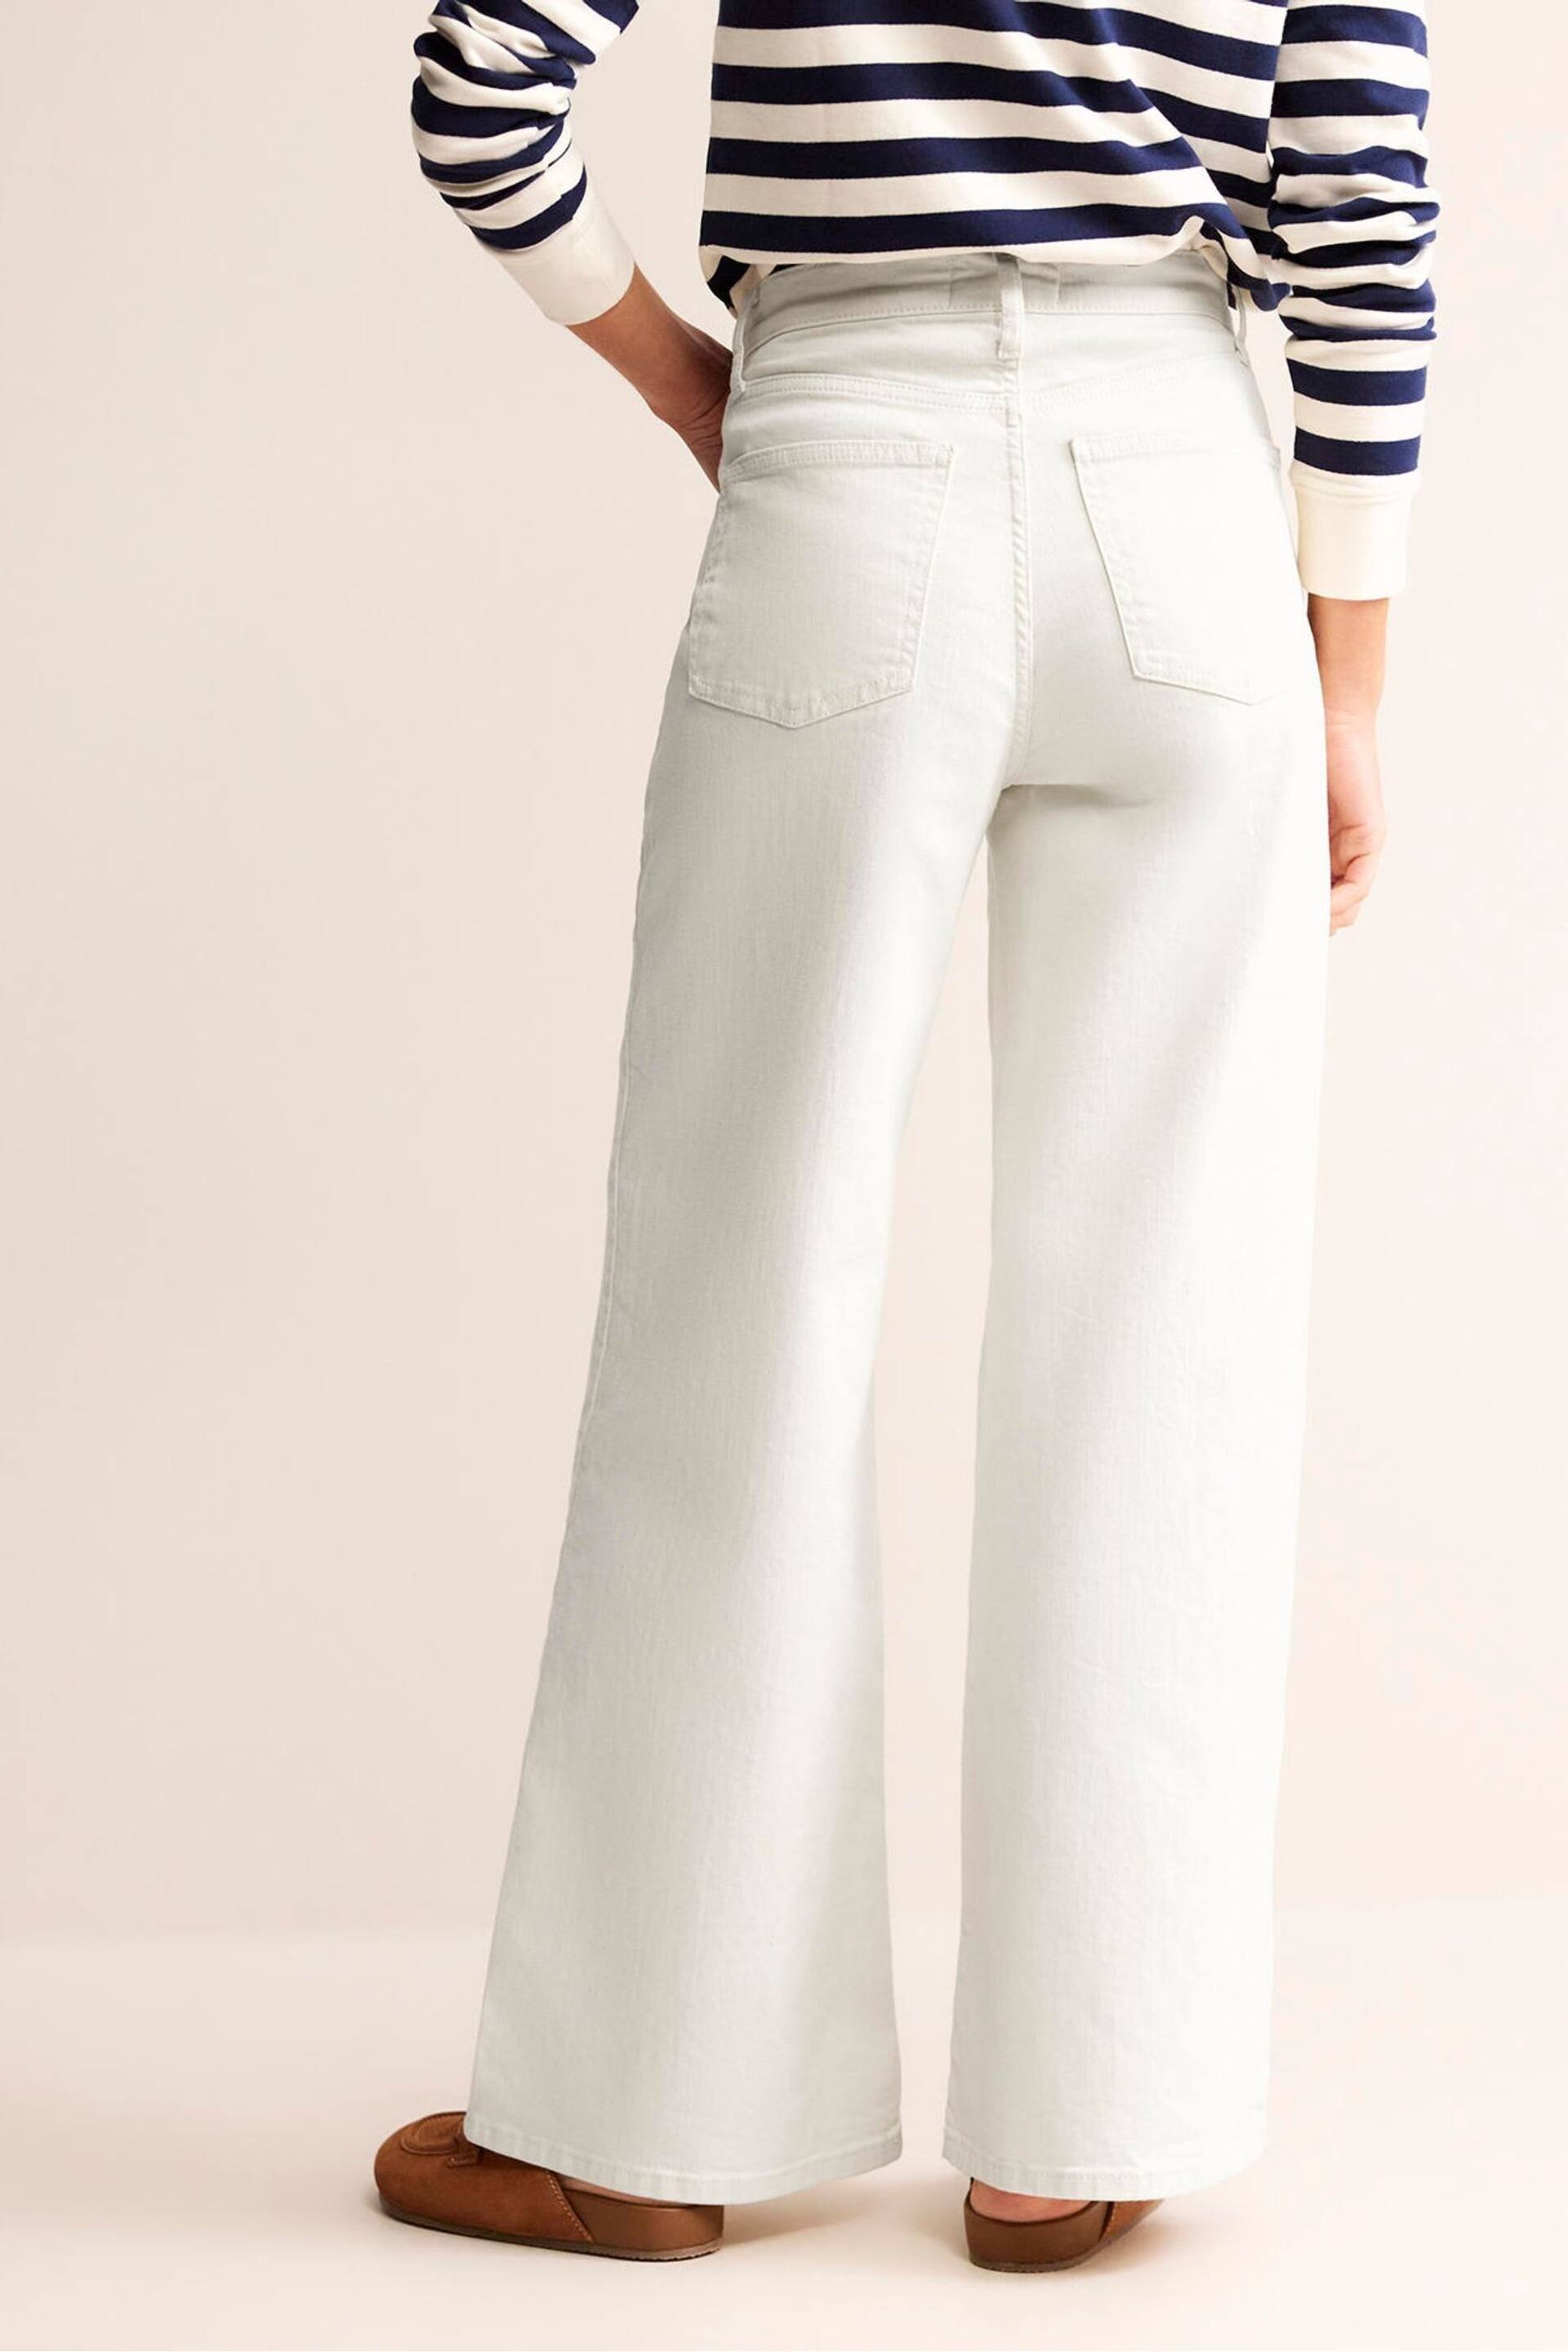 Boden White High Rise Wide Leg Jeans - Image 2 of 8